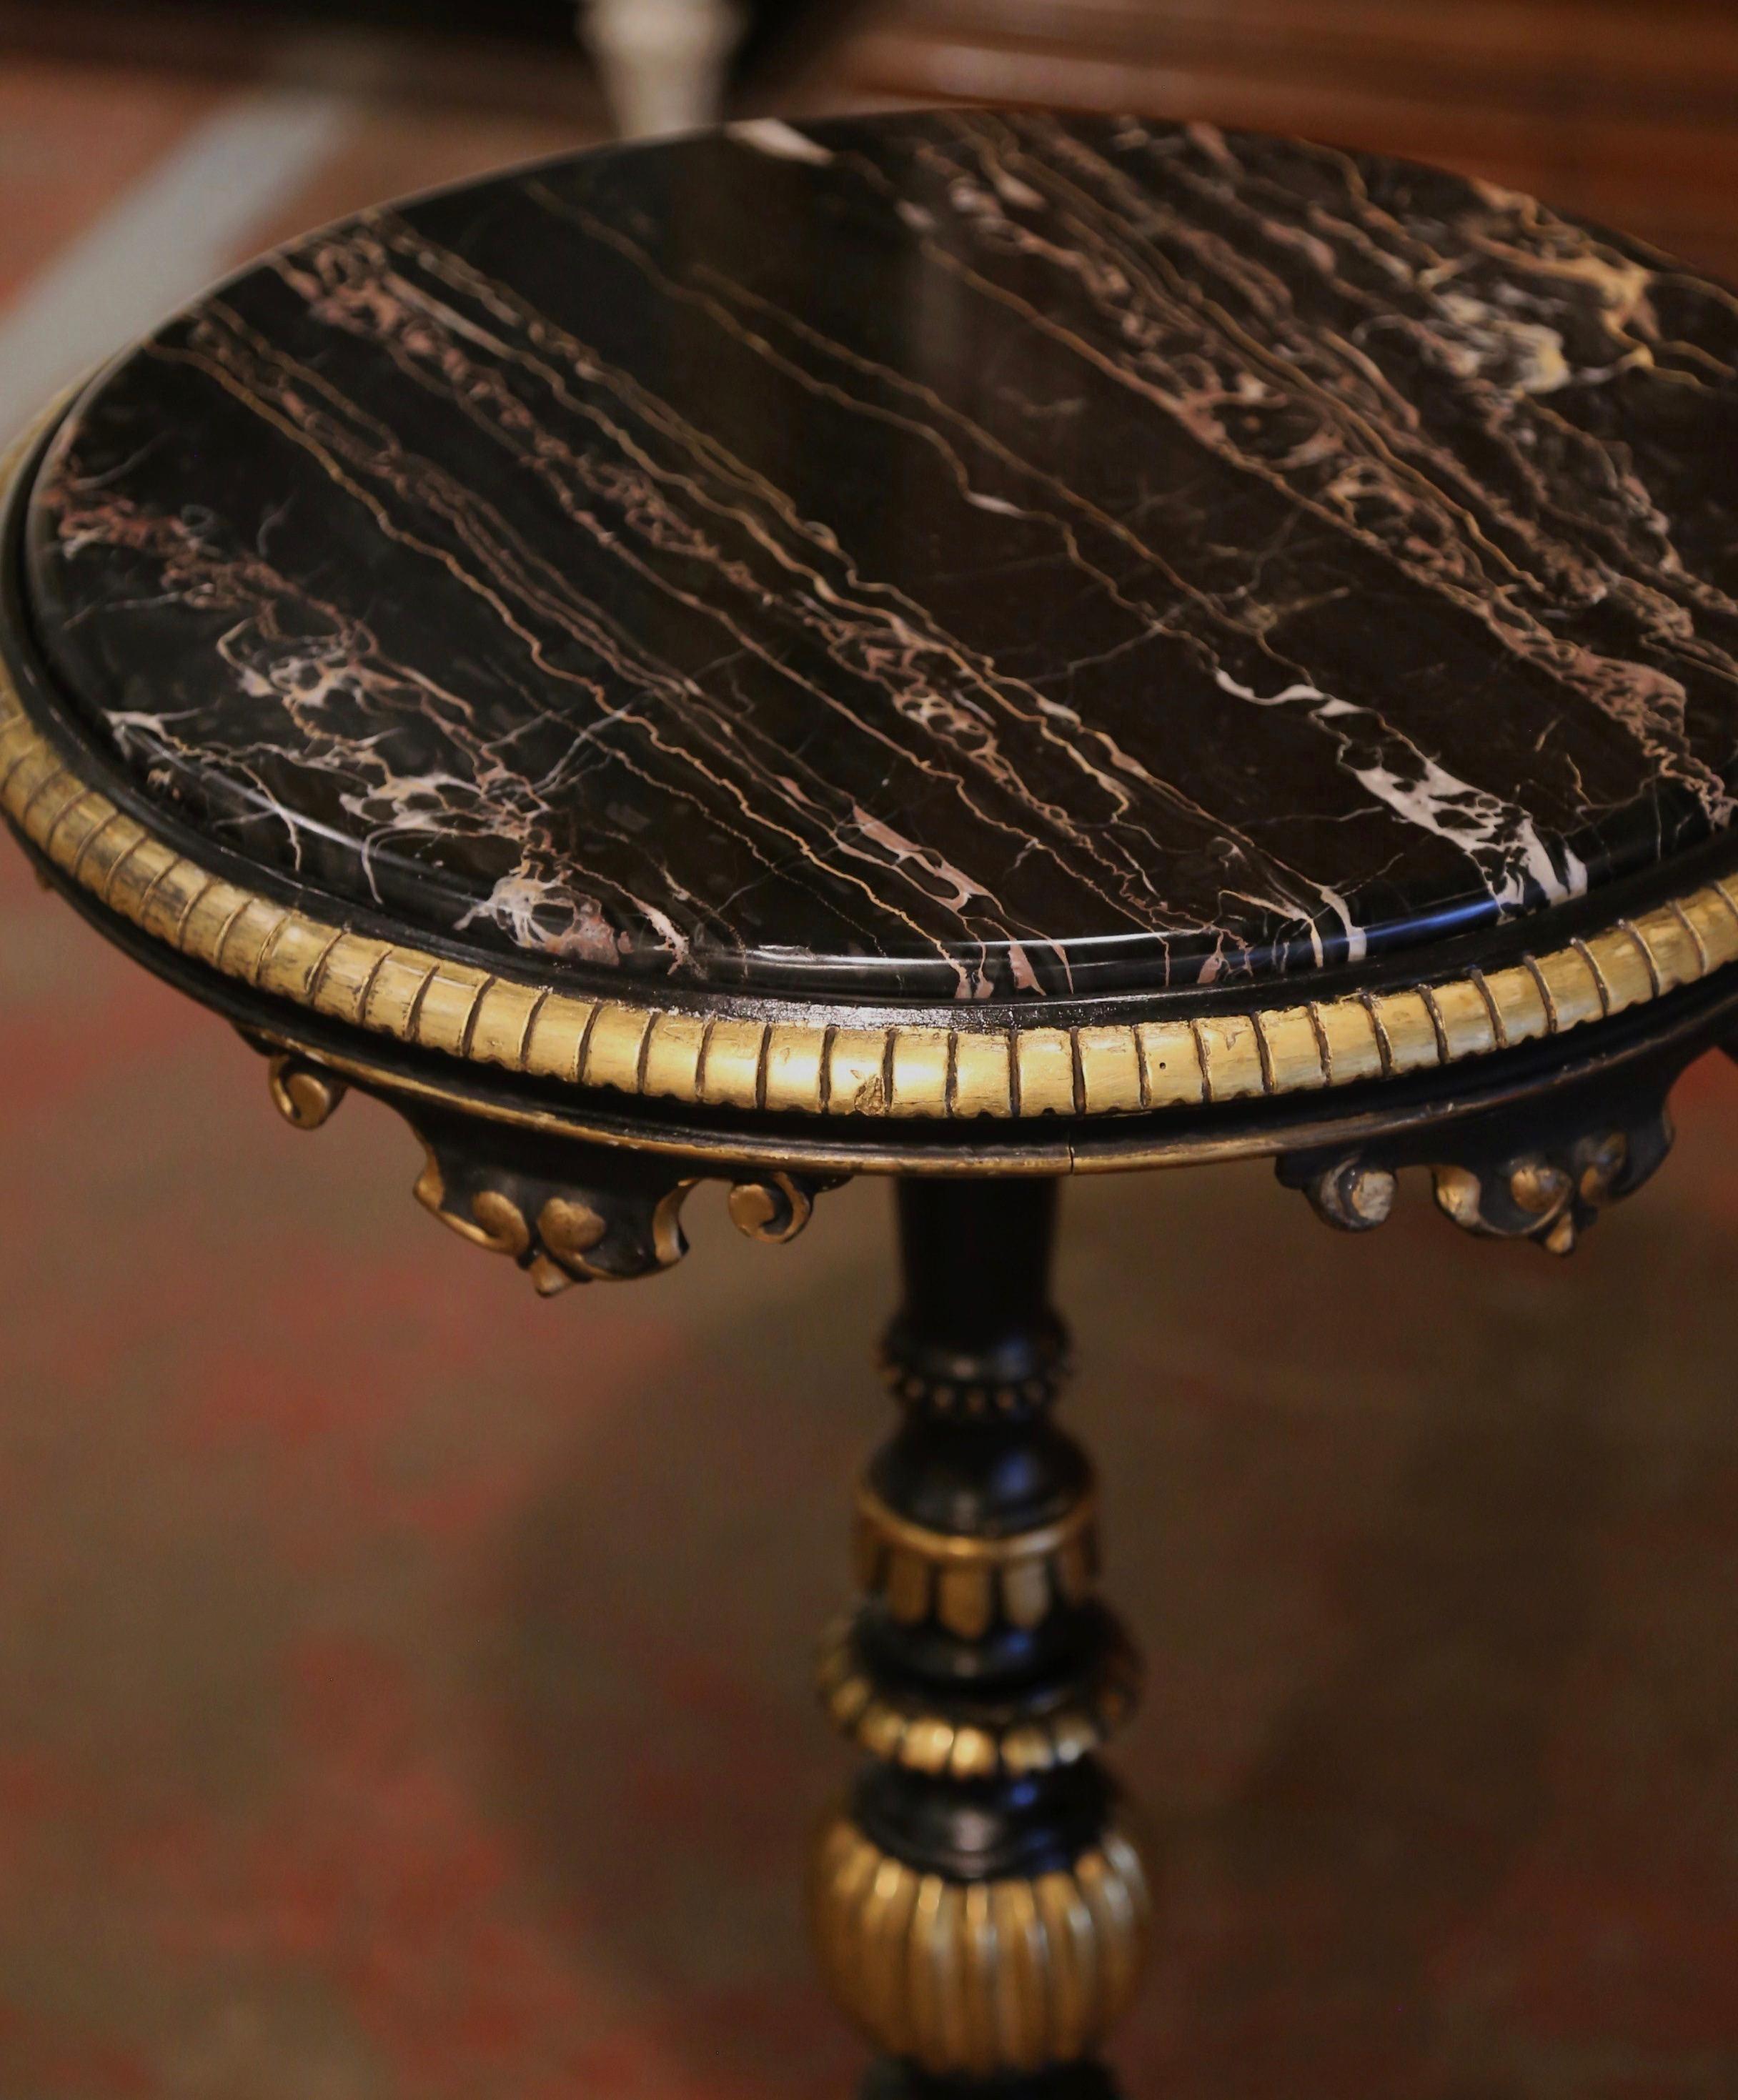 Napoleon III Mid-19th Century Italian Marble Top Carved Giltwood and Blackened Pedestal Table